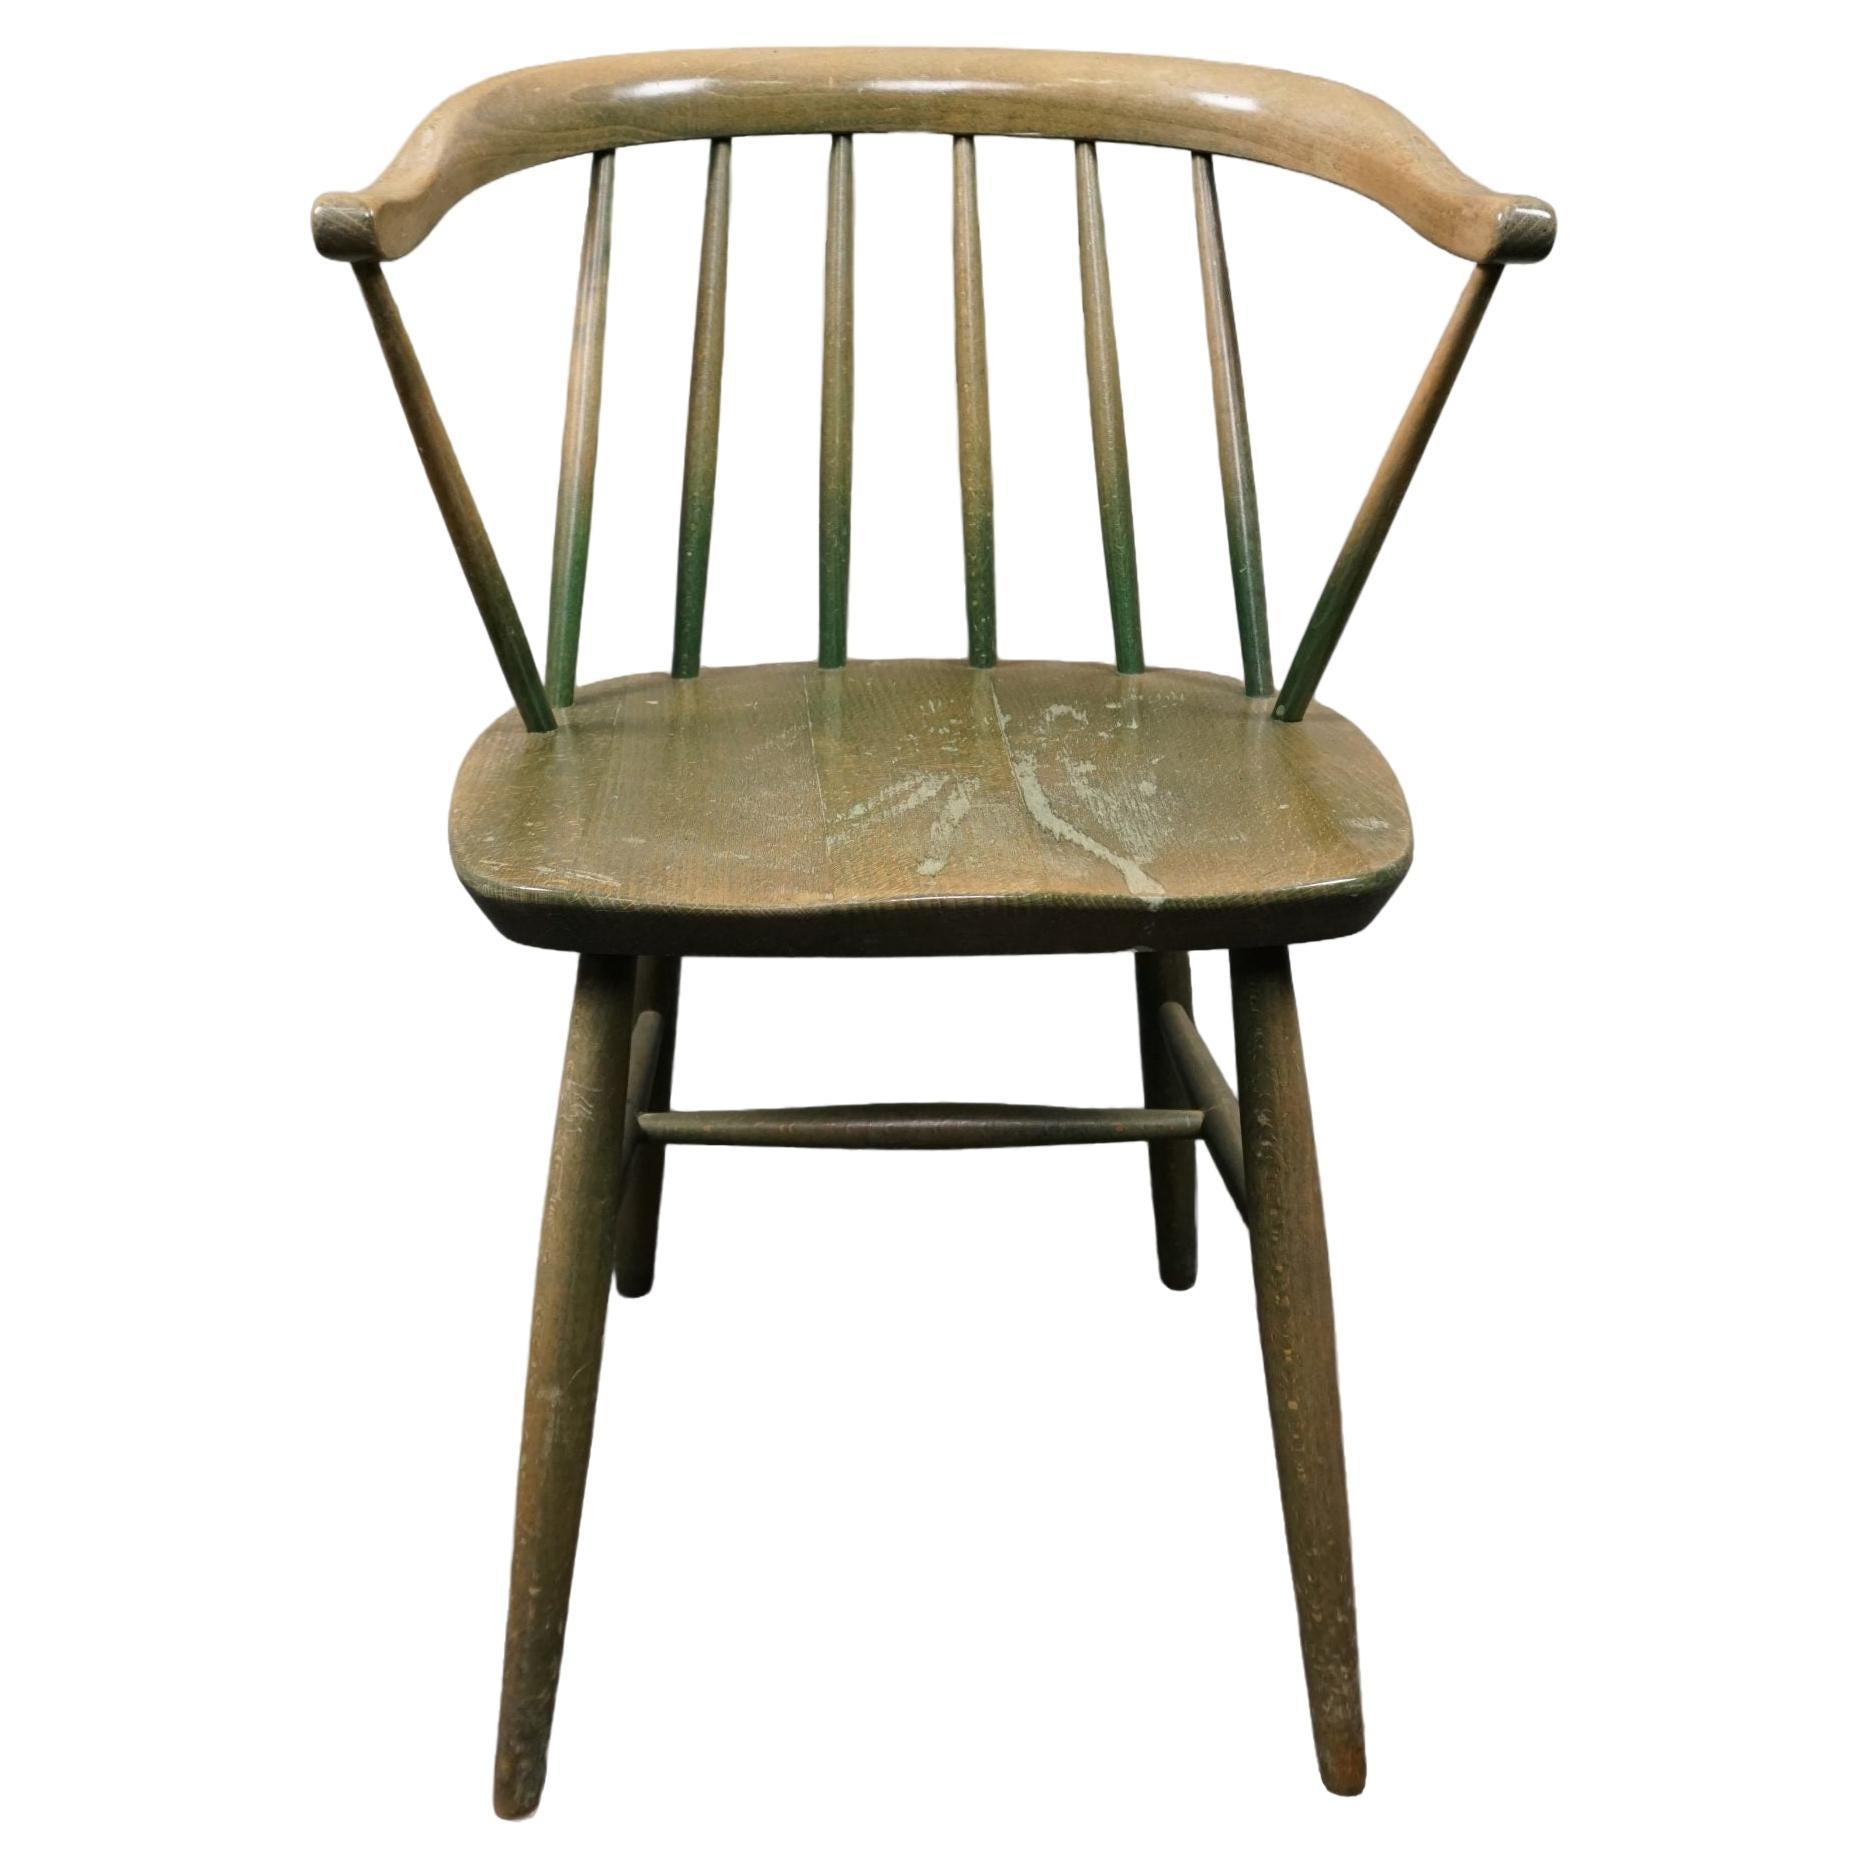 Beautiful vintage worn green spindle chair